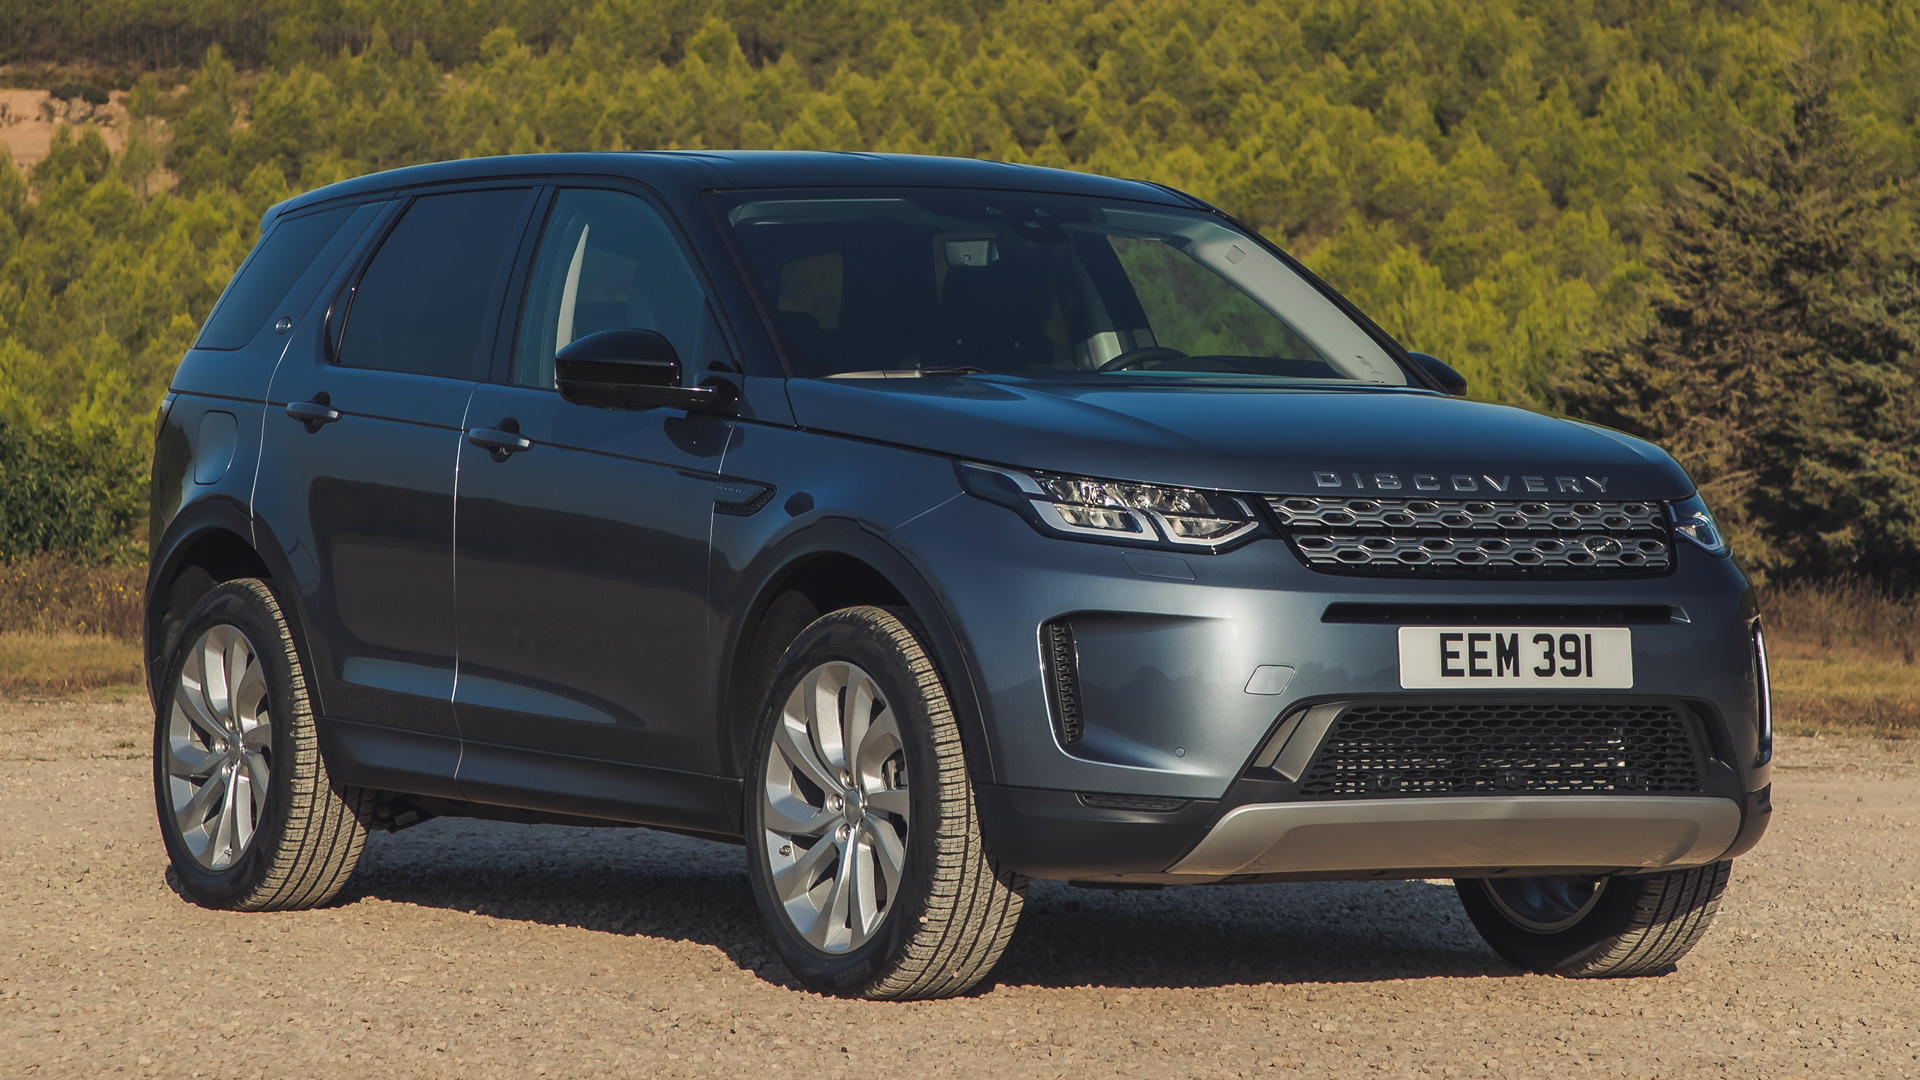 Car Land Rover Discovery Sport Suv Silver Car 1920x1080